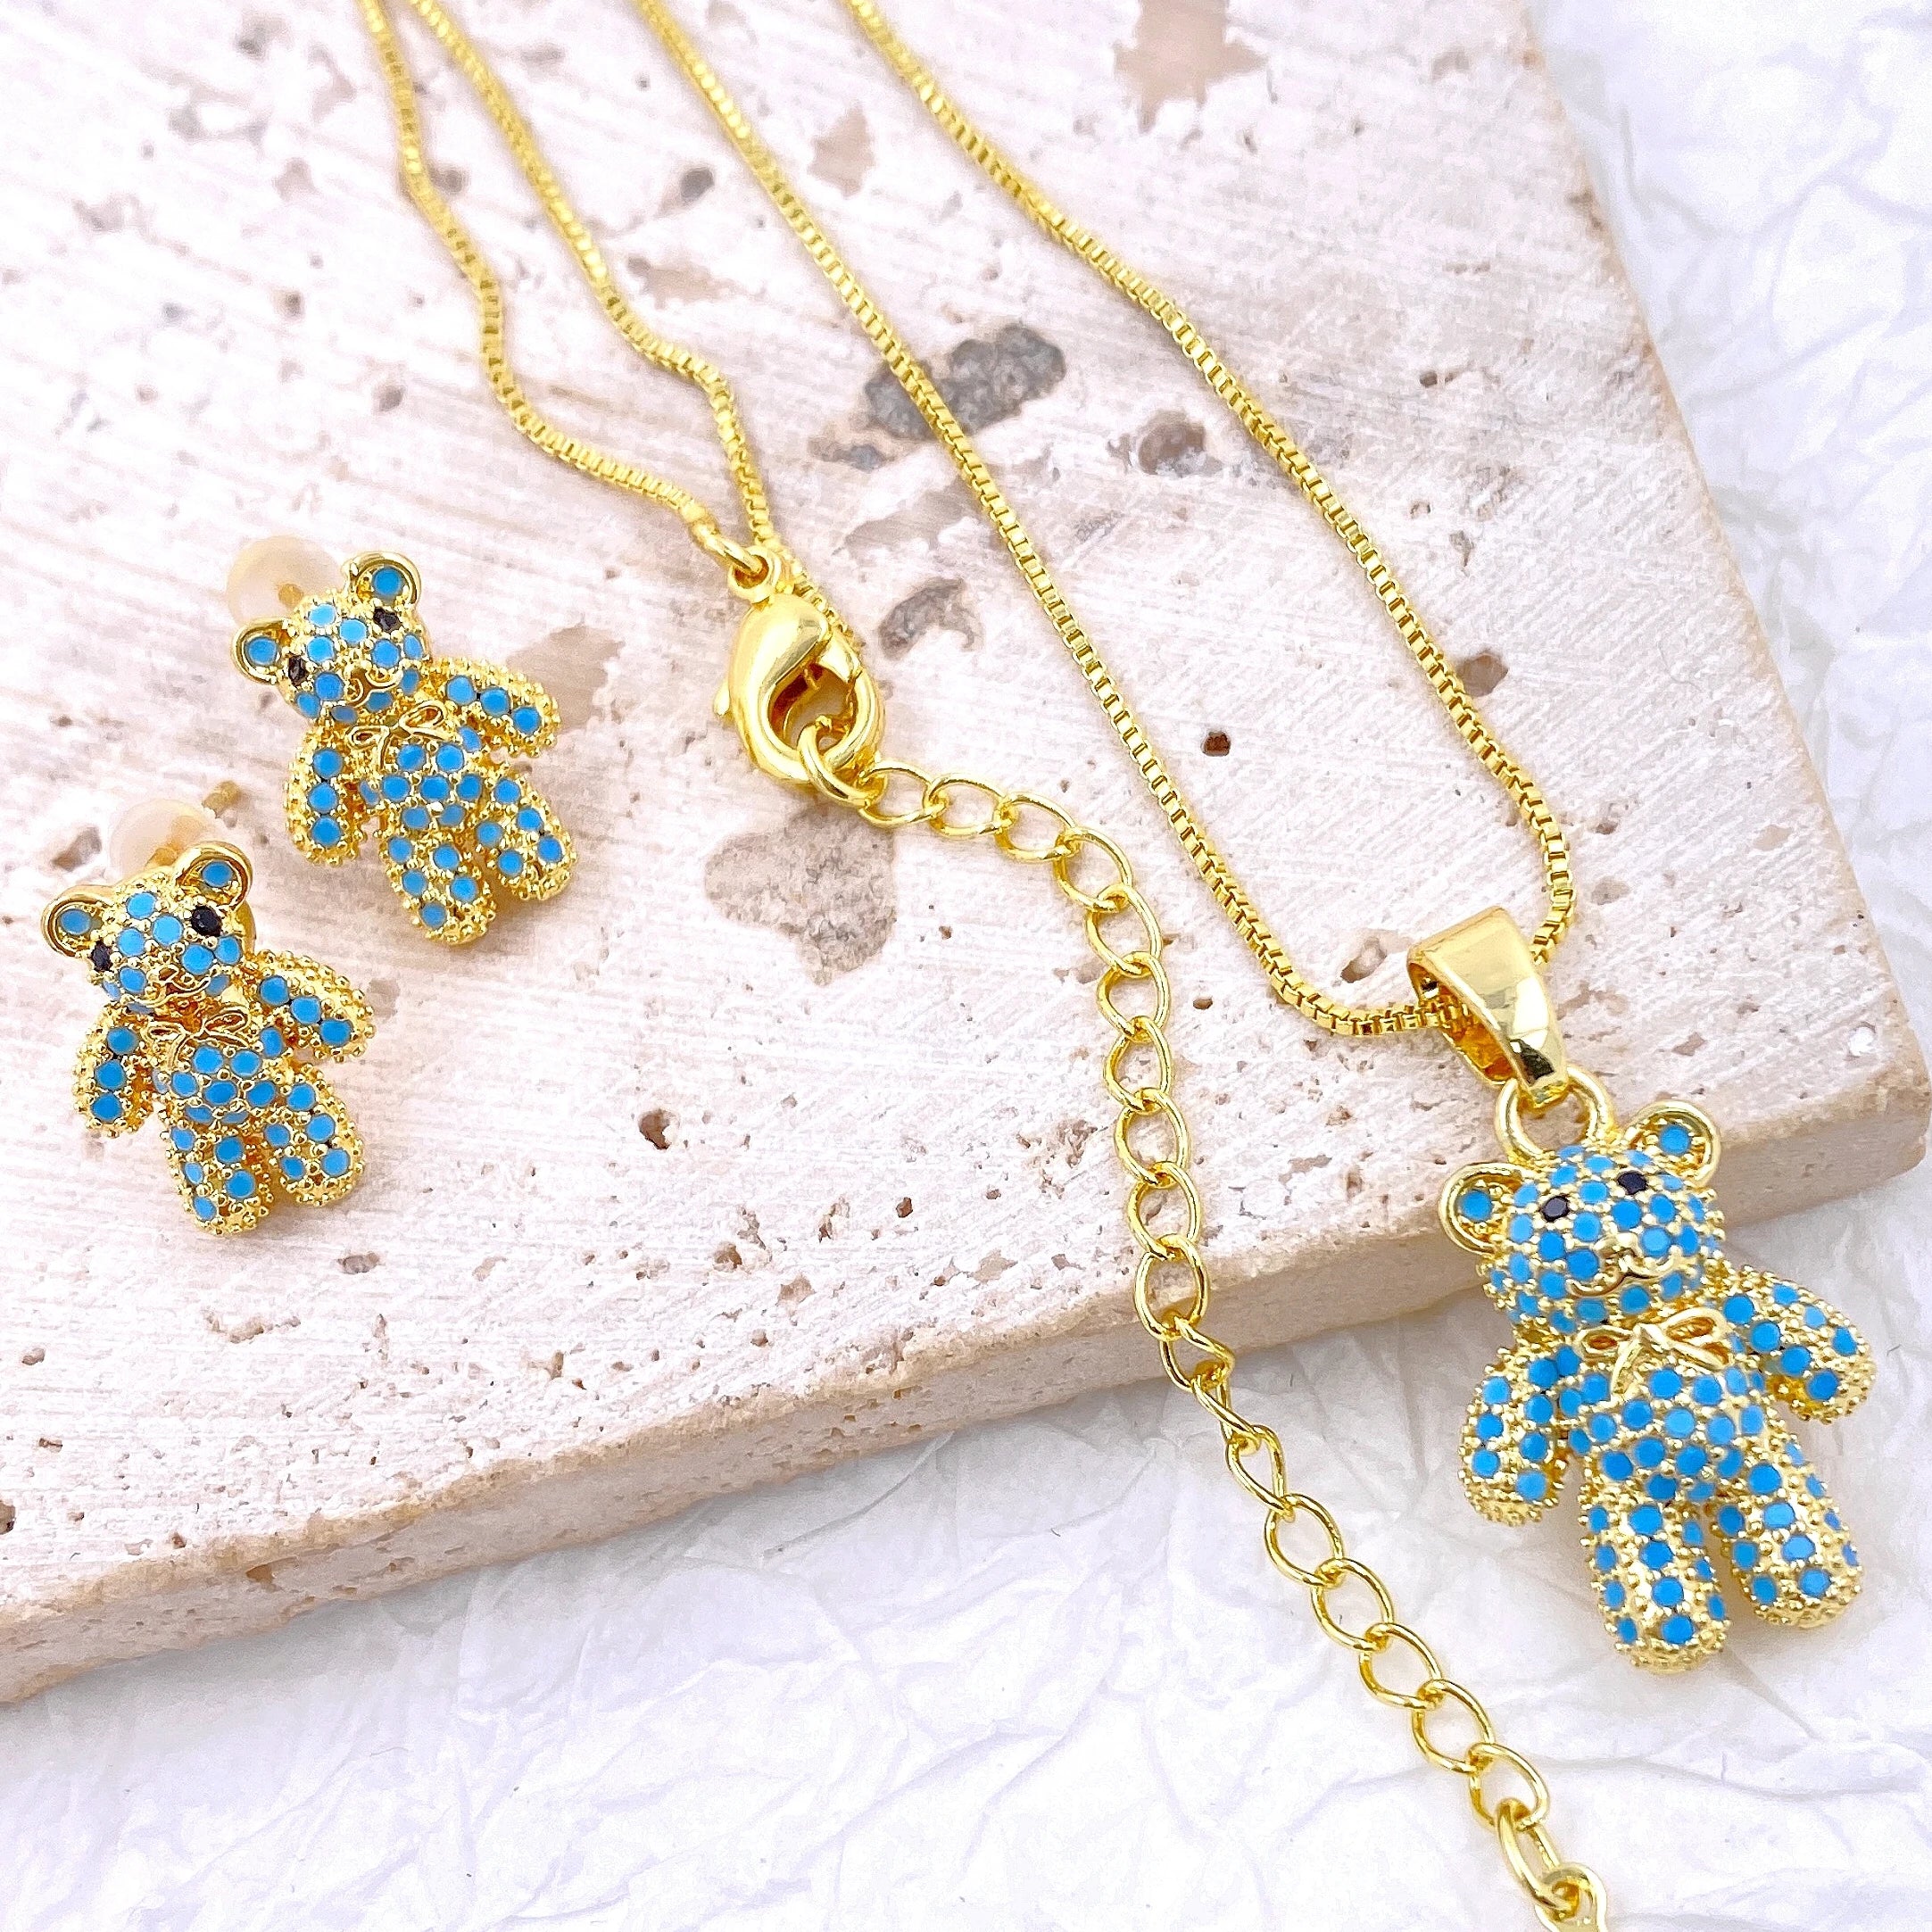 Teddy Bear Treasure: Chic Cubic Zirconia Stud Earrings and Pendant Necklace Set for Kids!